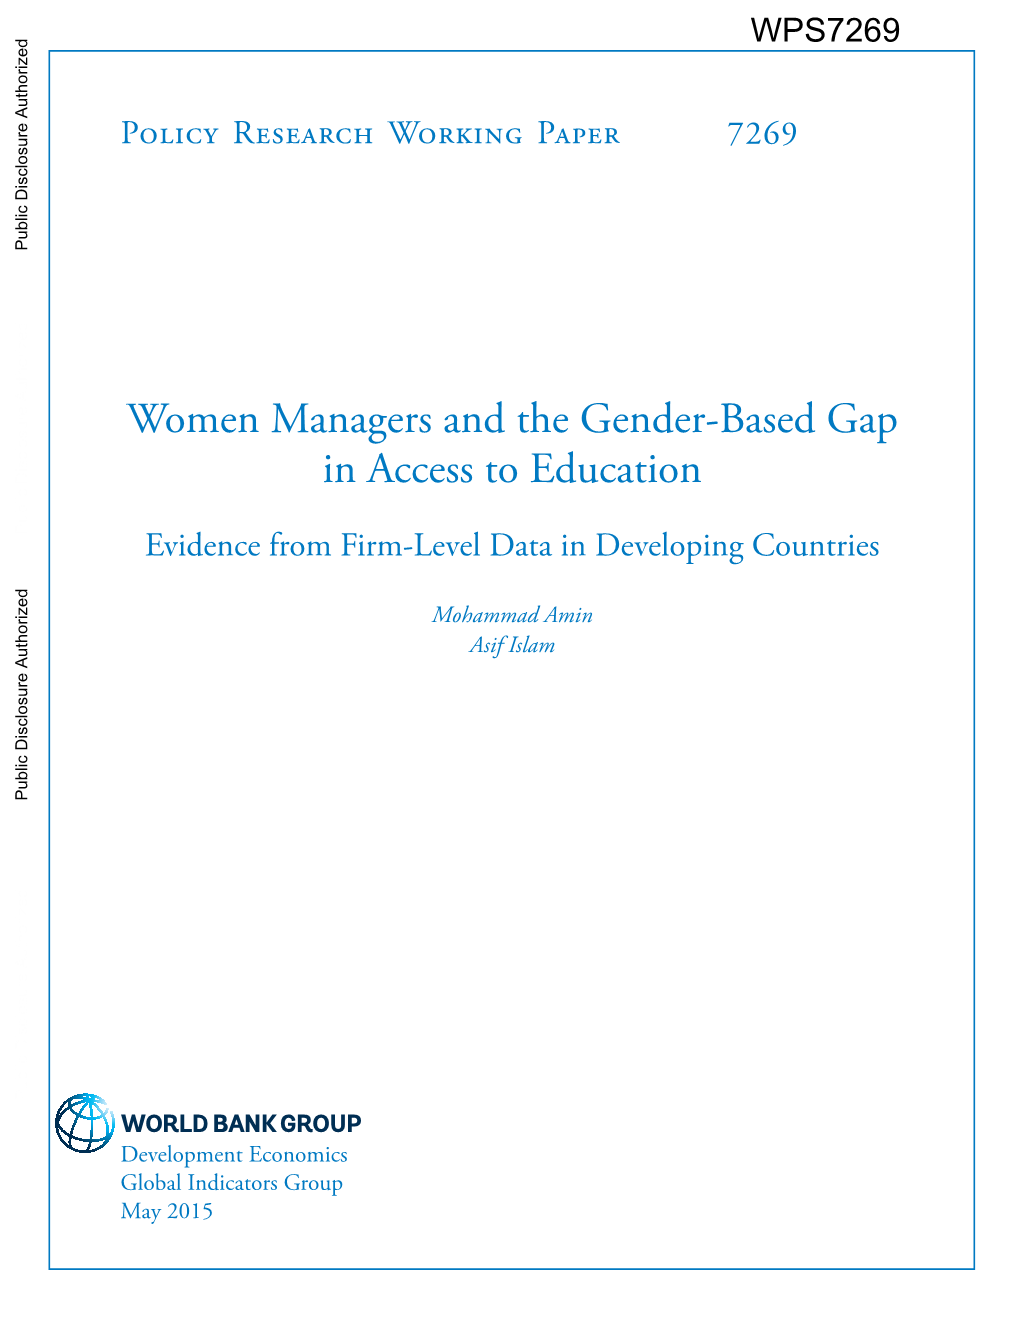 Women Managers and the Gender-Based Gap in Access to Education